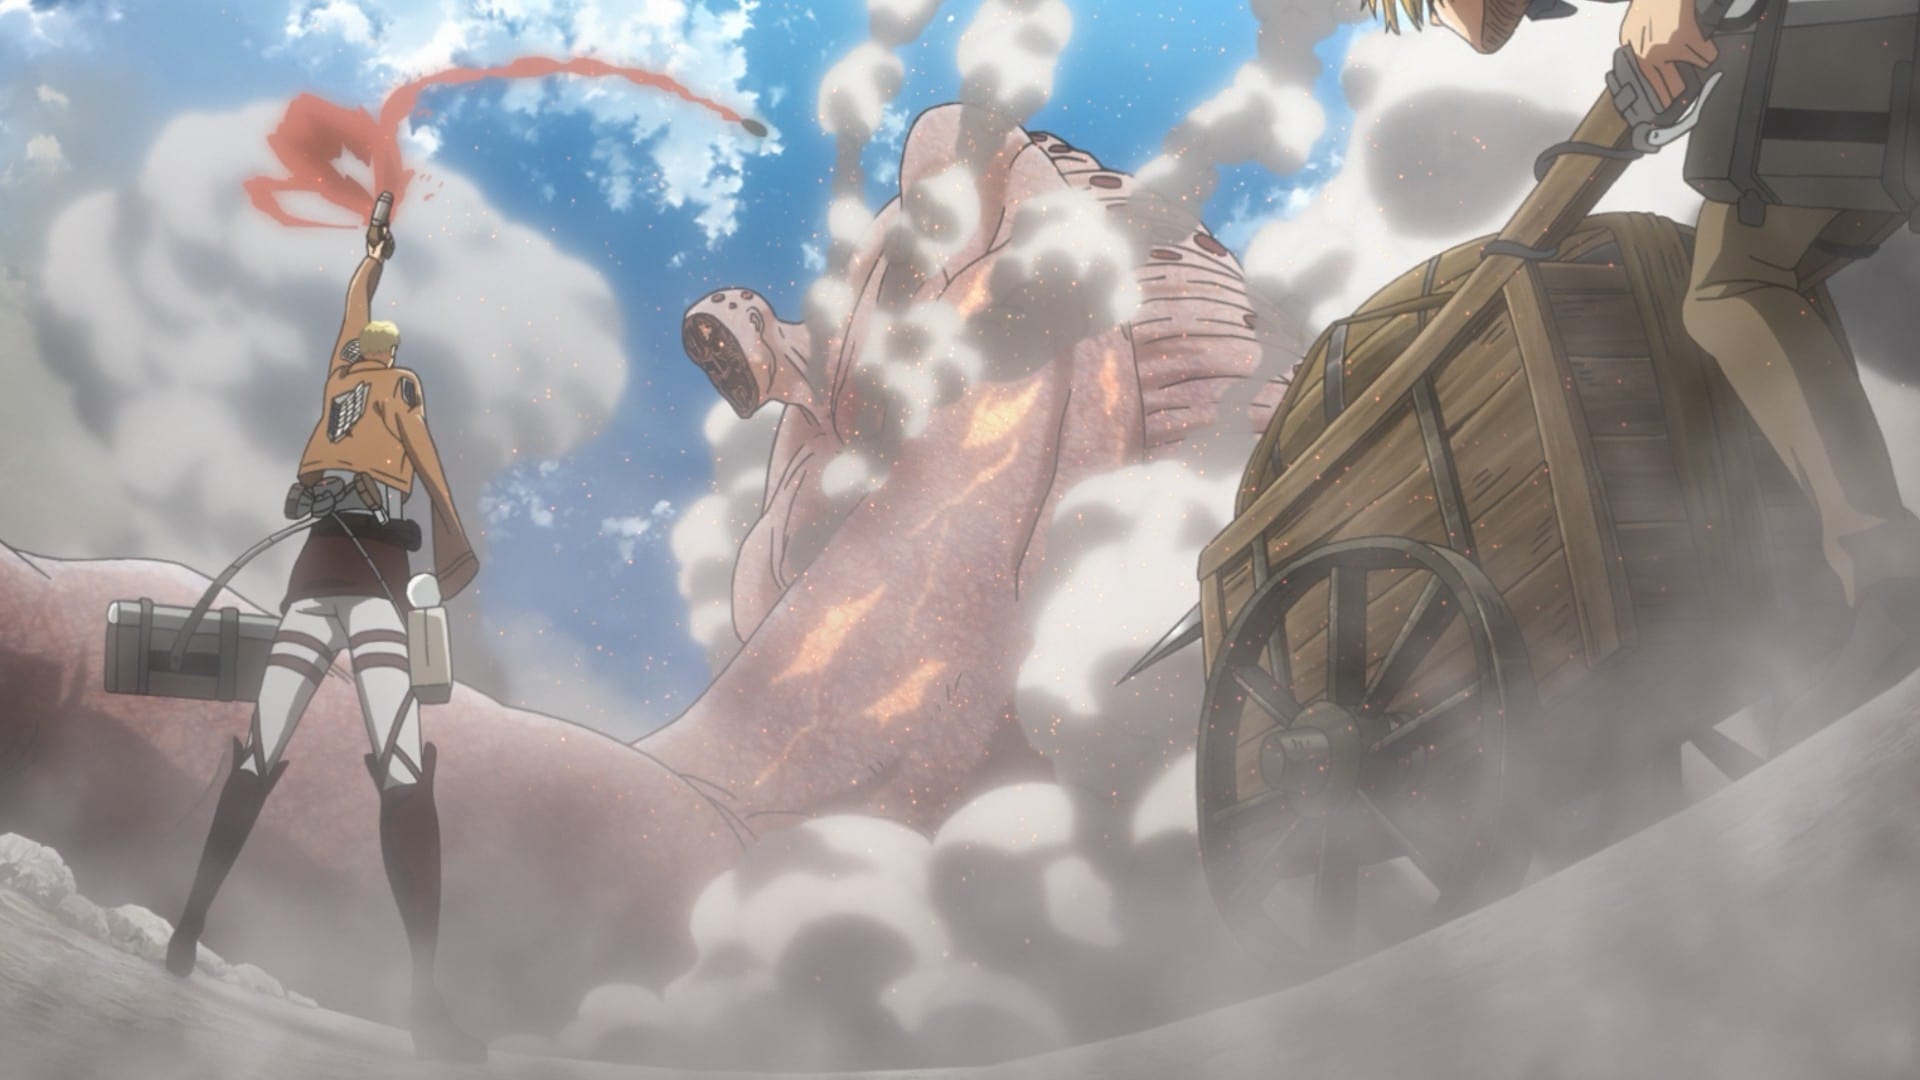 Attack on Titan 3×09 Review: Ruler of the Walls – The Geekiary